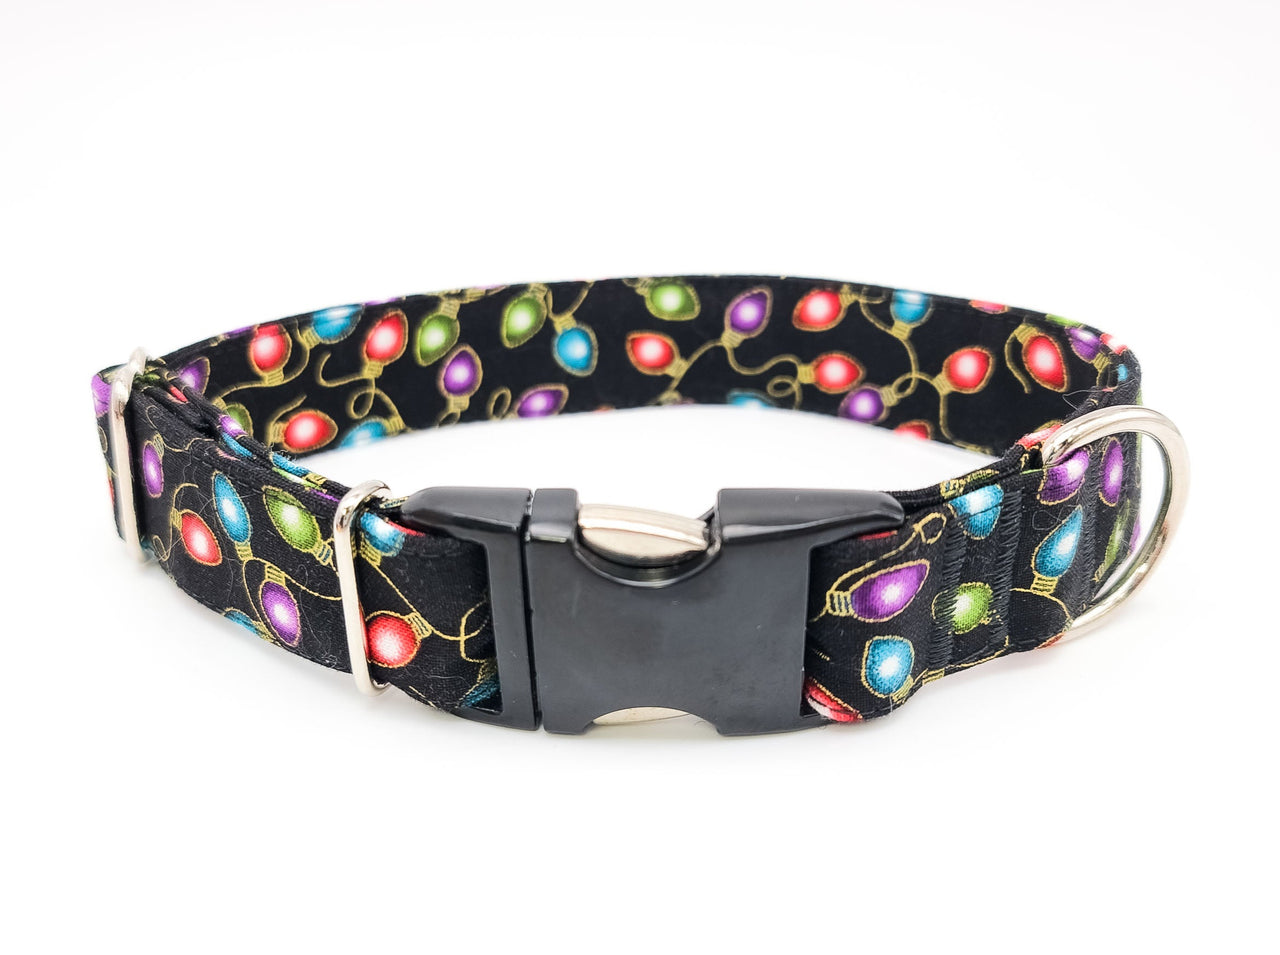 Christmas Lights | Cotton Fabric | Flat Side Release Collar | Medium 11"-17" in 1" wide